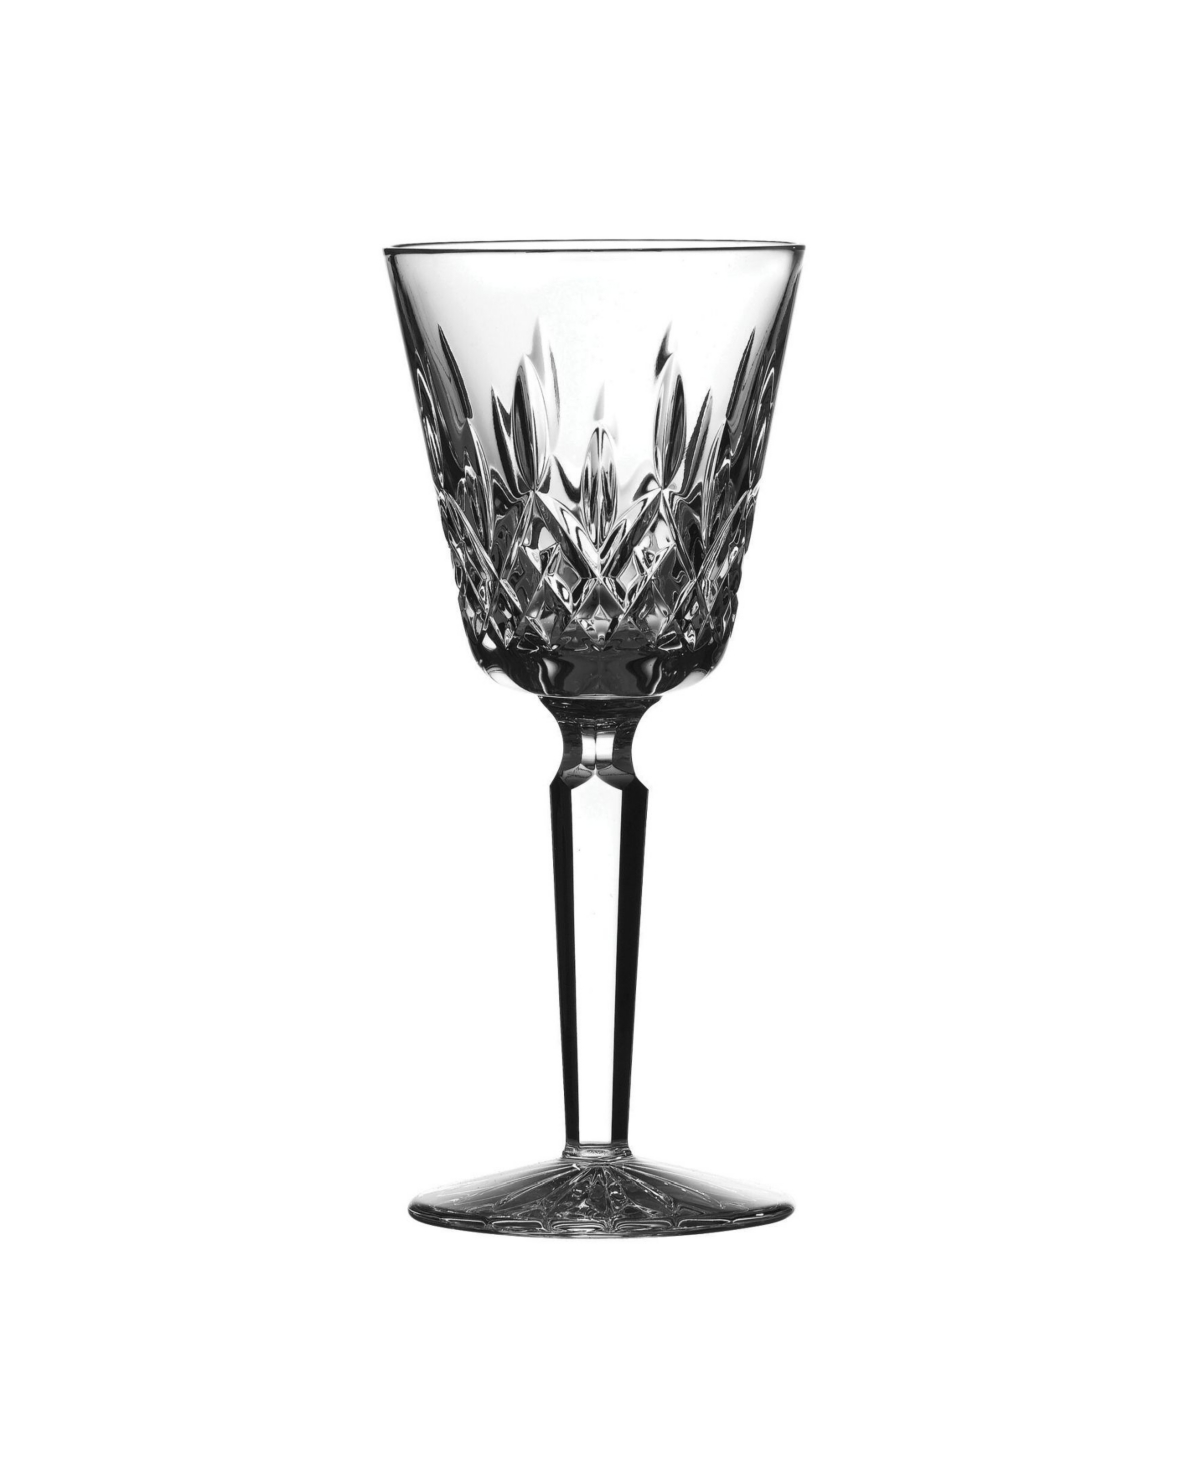 Waterford Lismore Tall Claret Glass, 5 oz In Clear